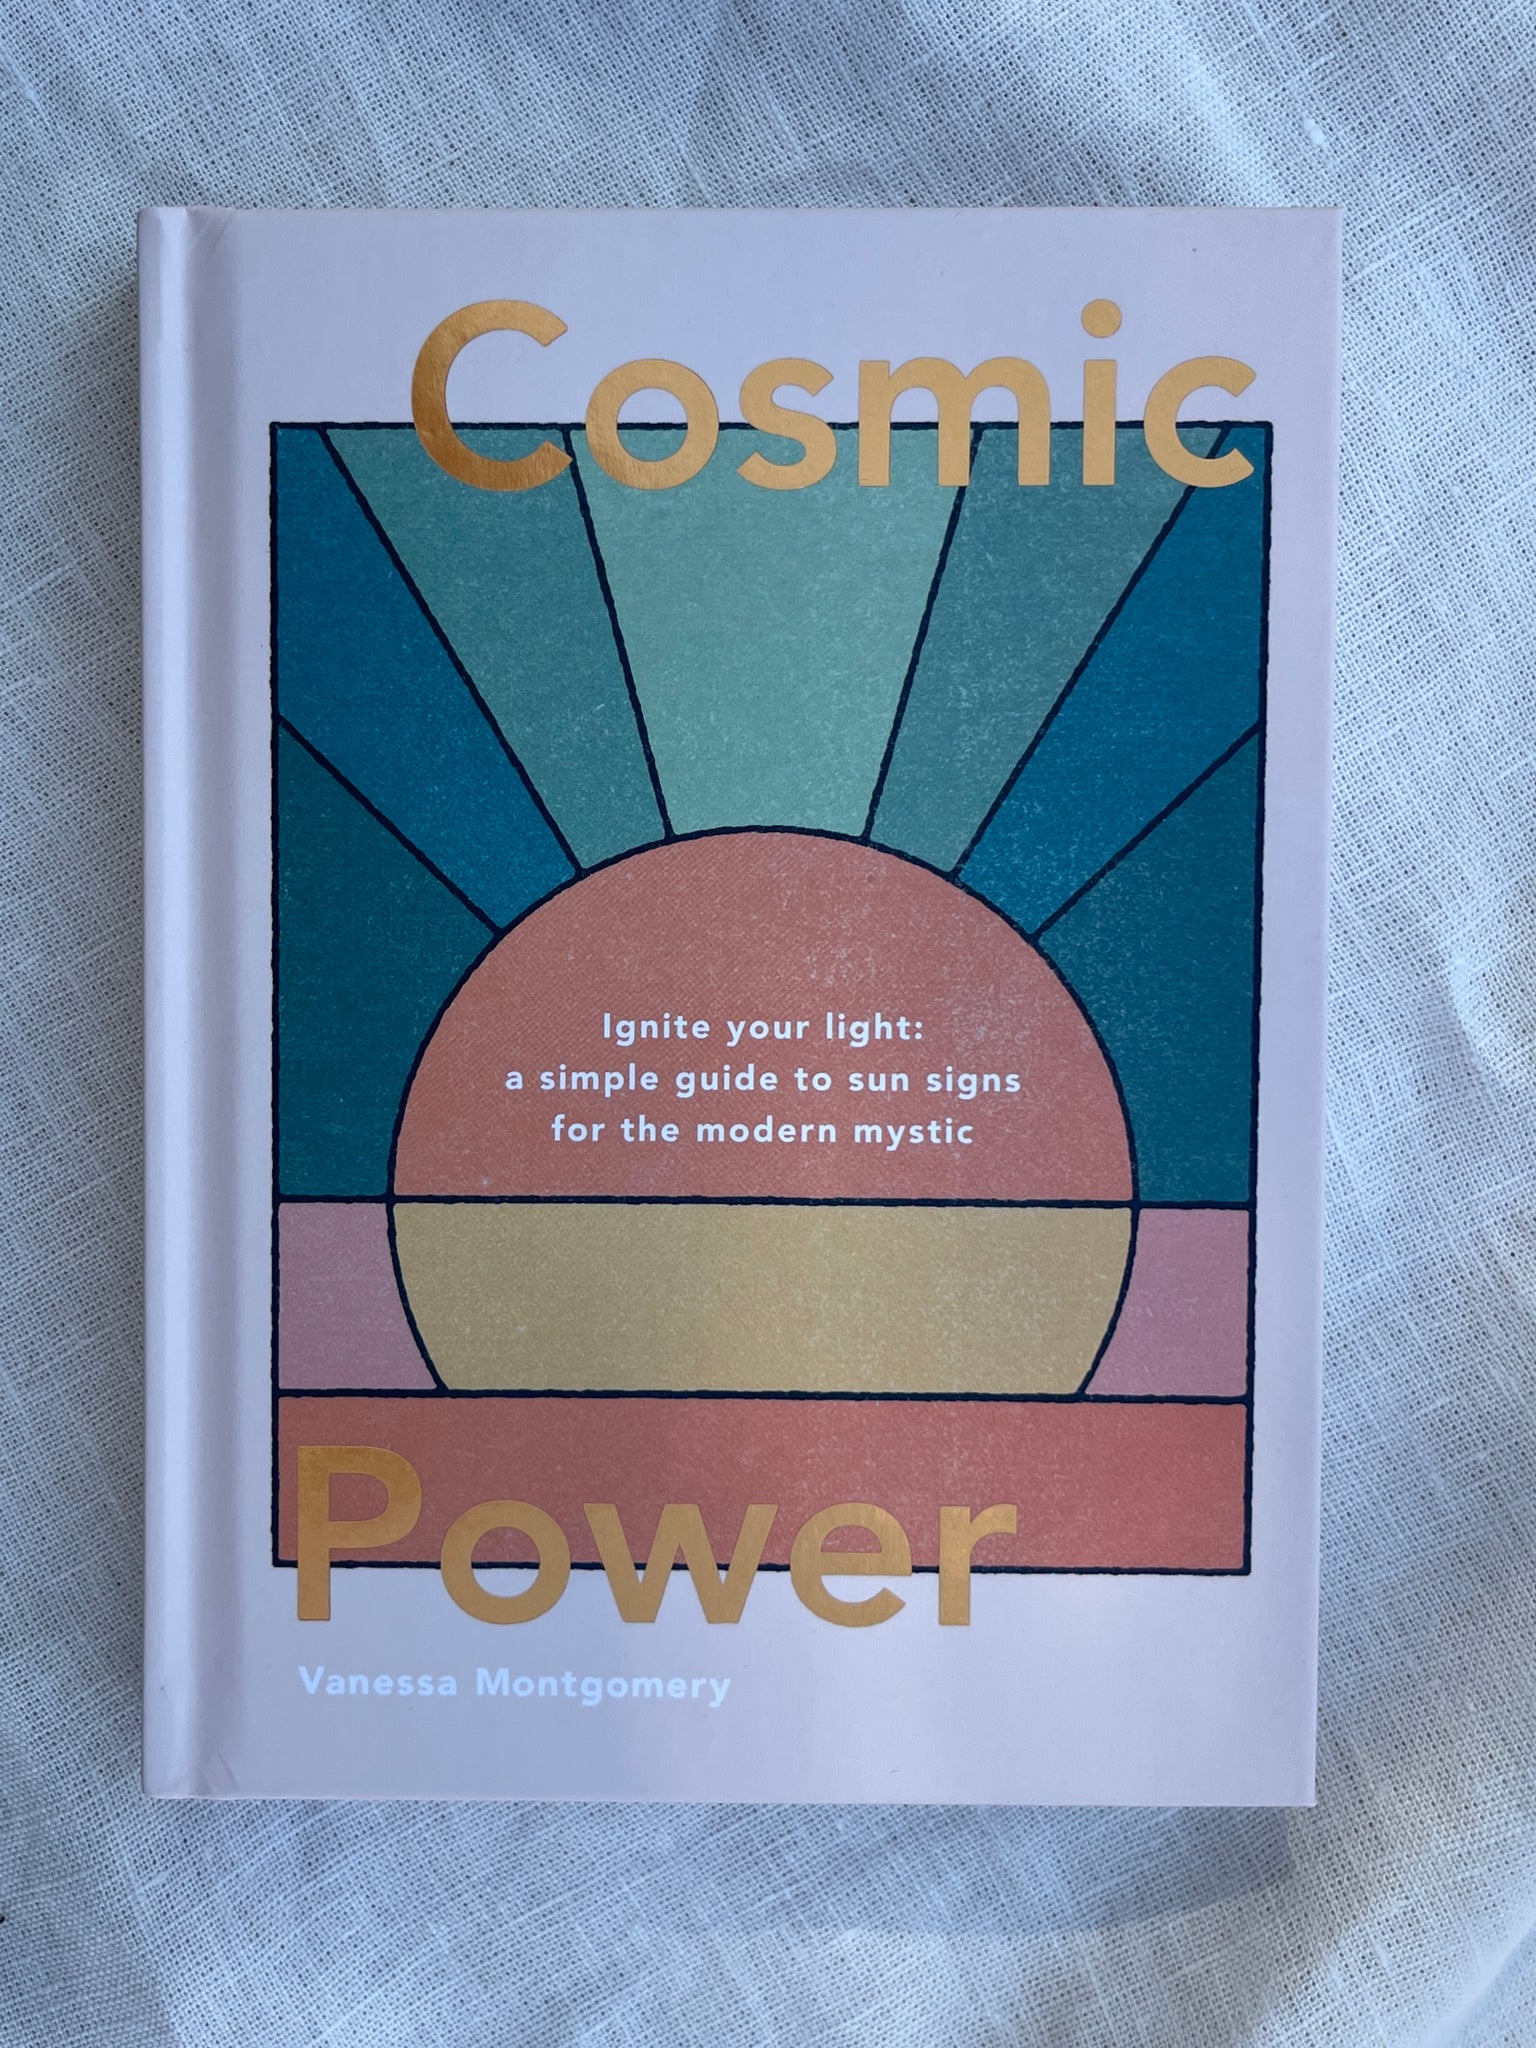 Cosmic Power book ignite your light: a simple guide to sun signs for the modern mystic by vanessa montgomery